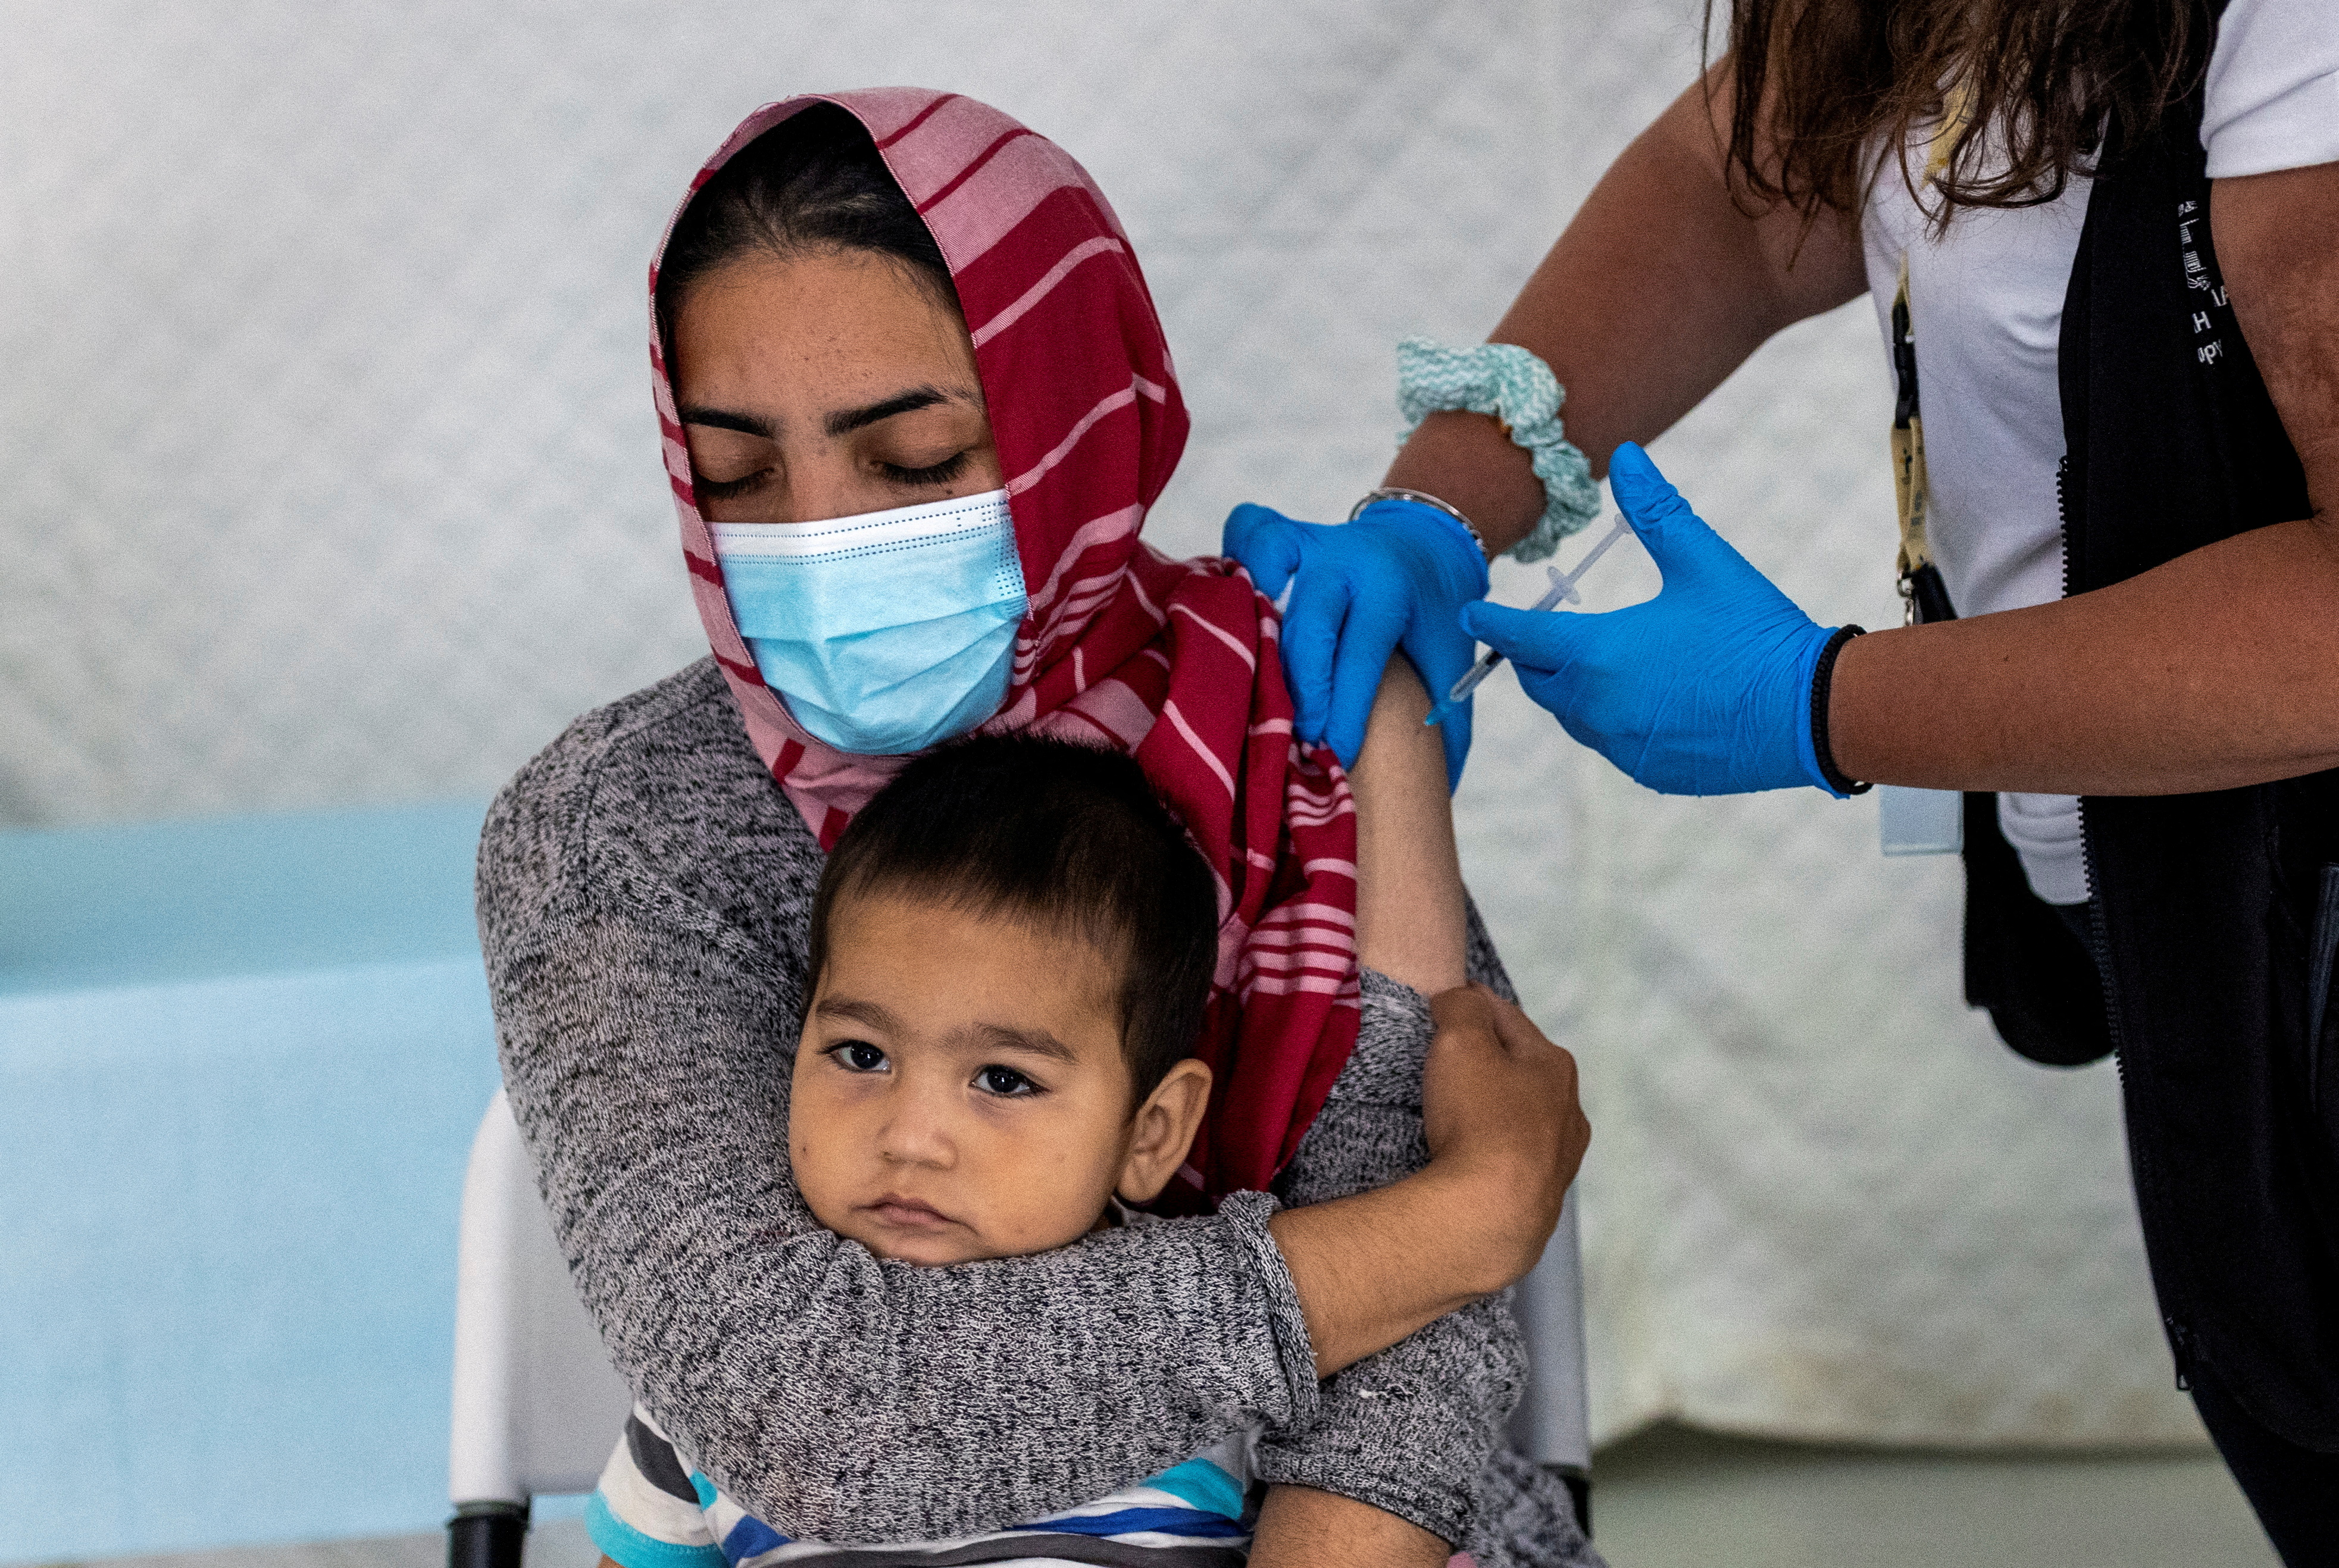 Vaccination against the coronavirus disease (COVID-19) in the Mavrovouni camp for refugees and migrants on the island of Lesbos